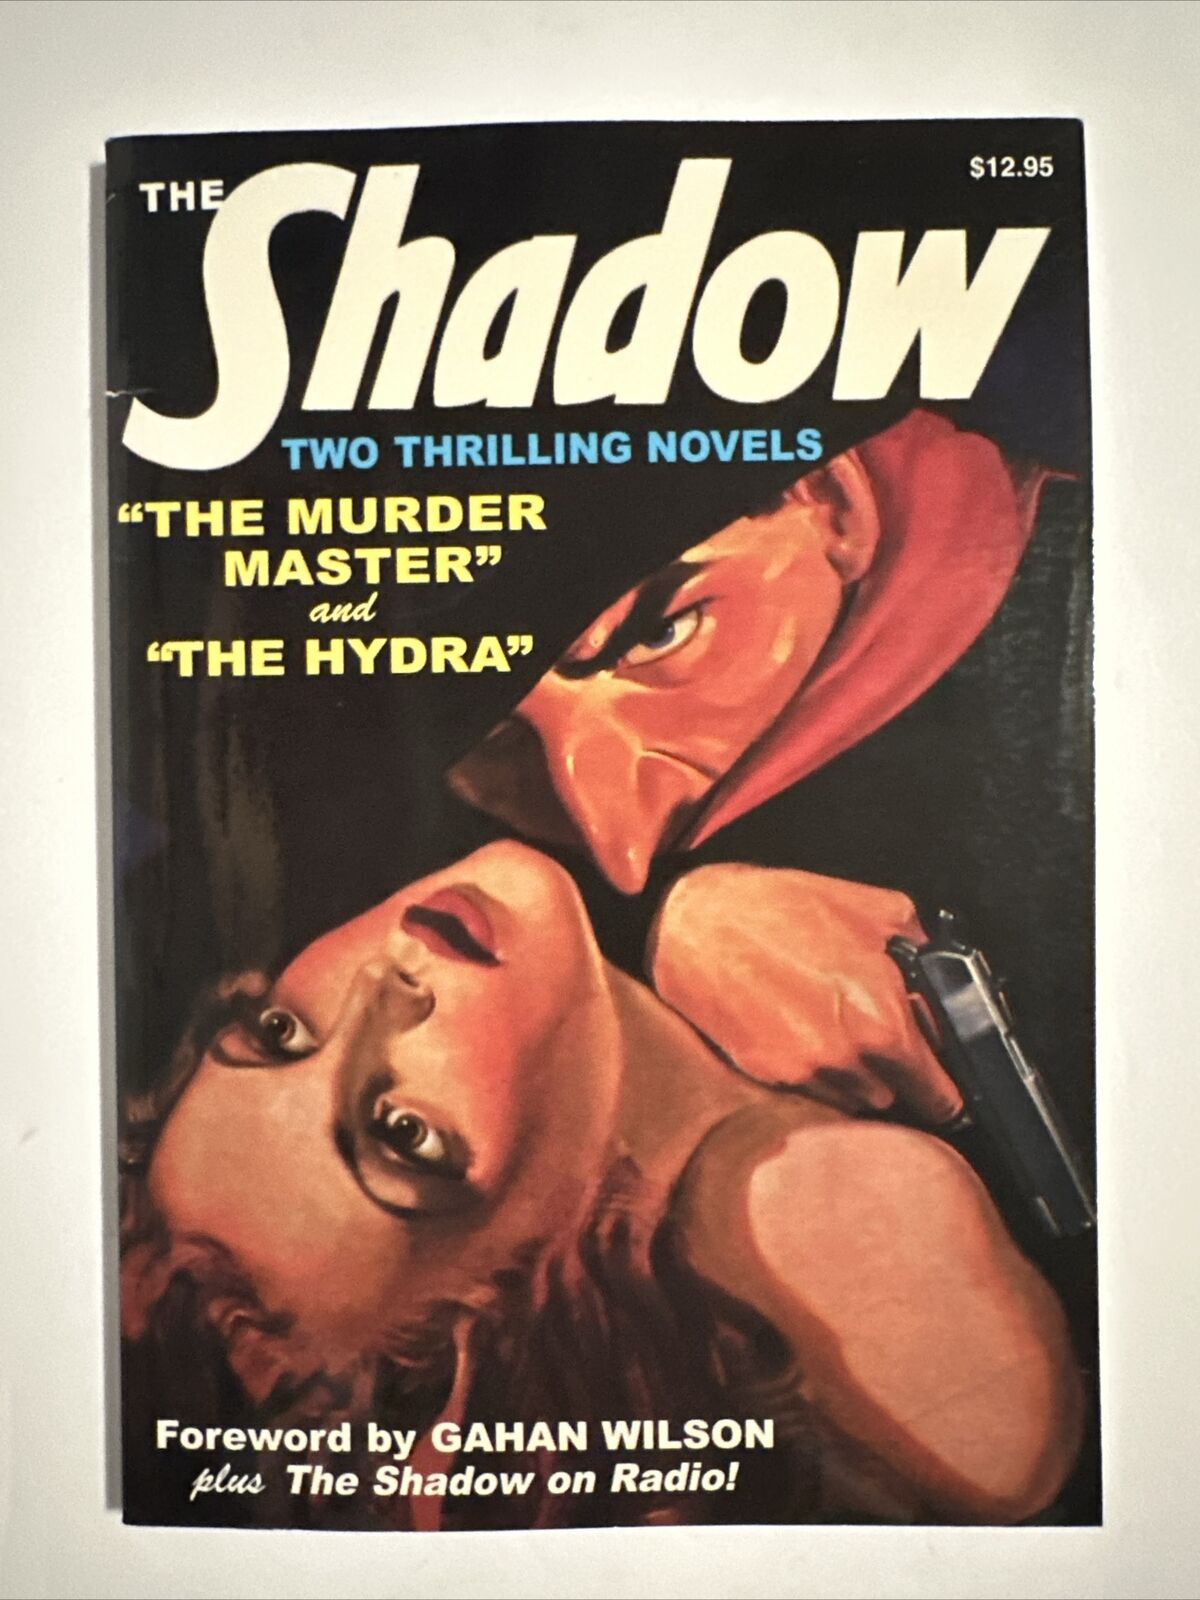 THE SHADOW #4 (Murder Master/The Hydra) Maxwell Grant (Paperback) new